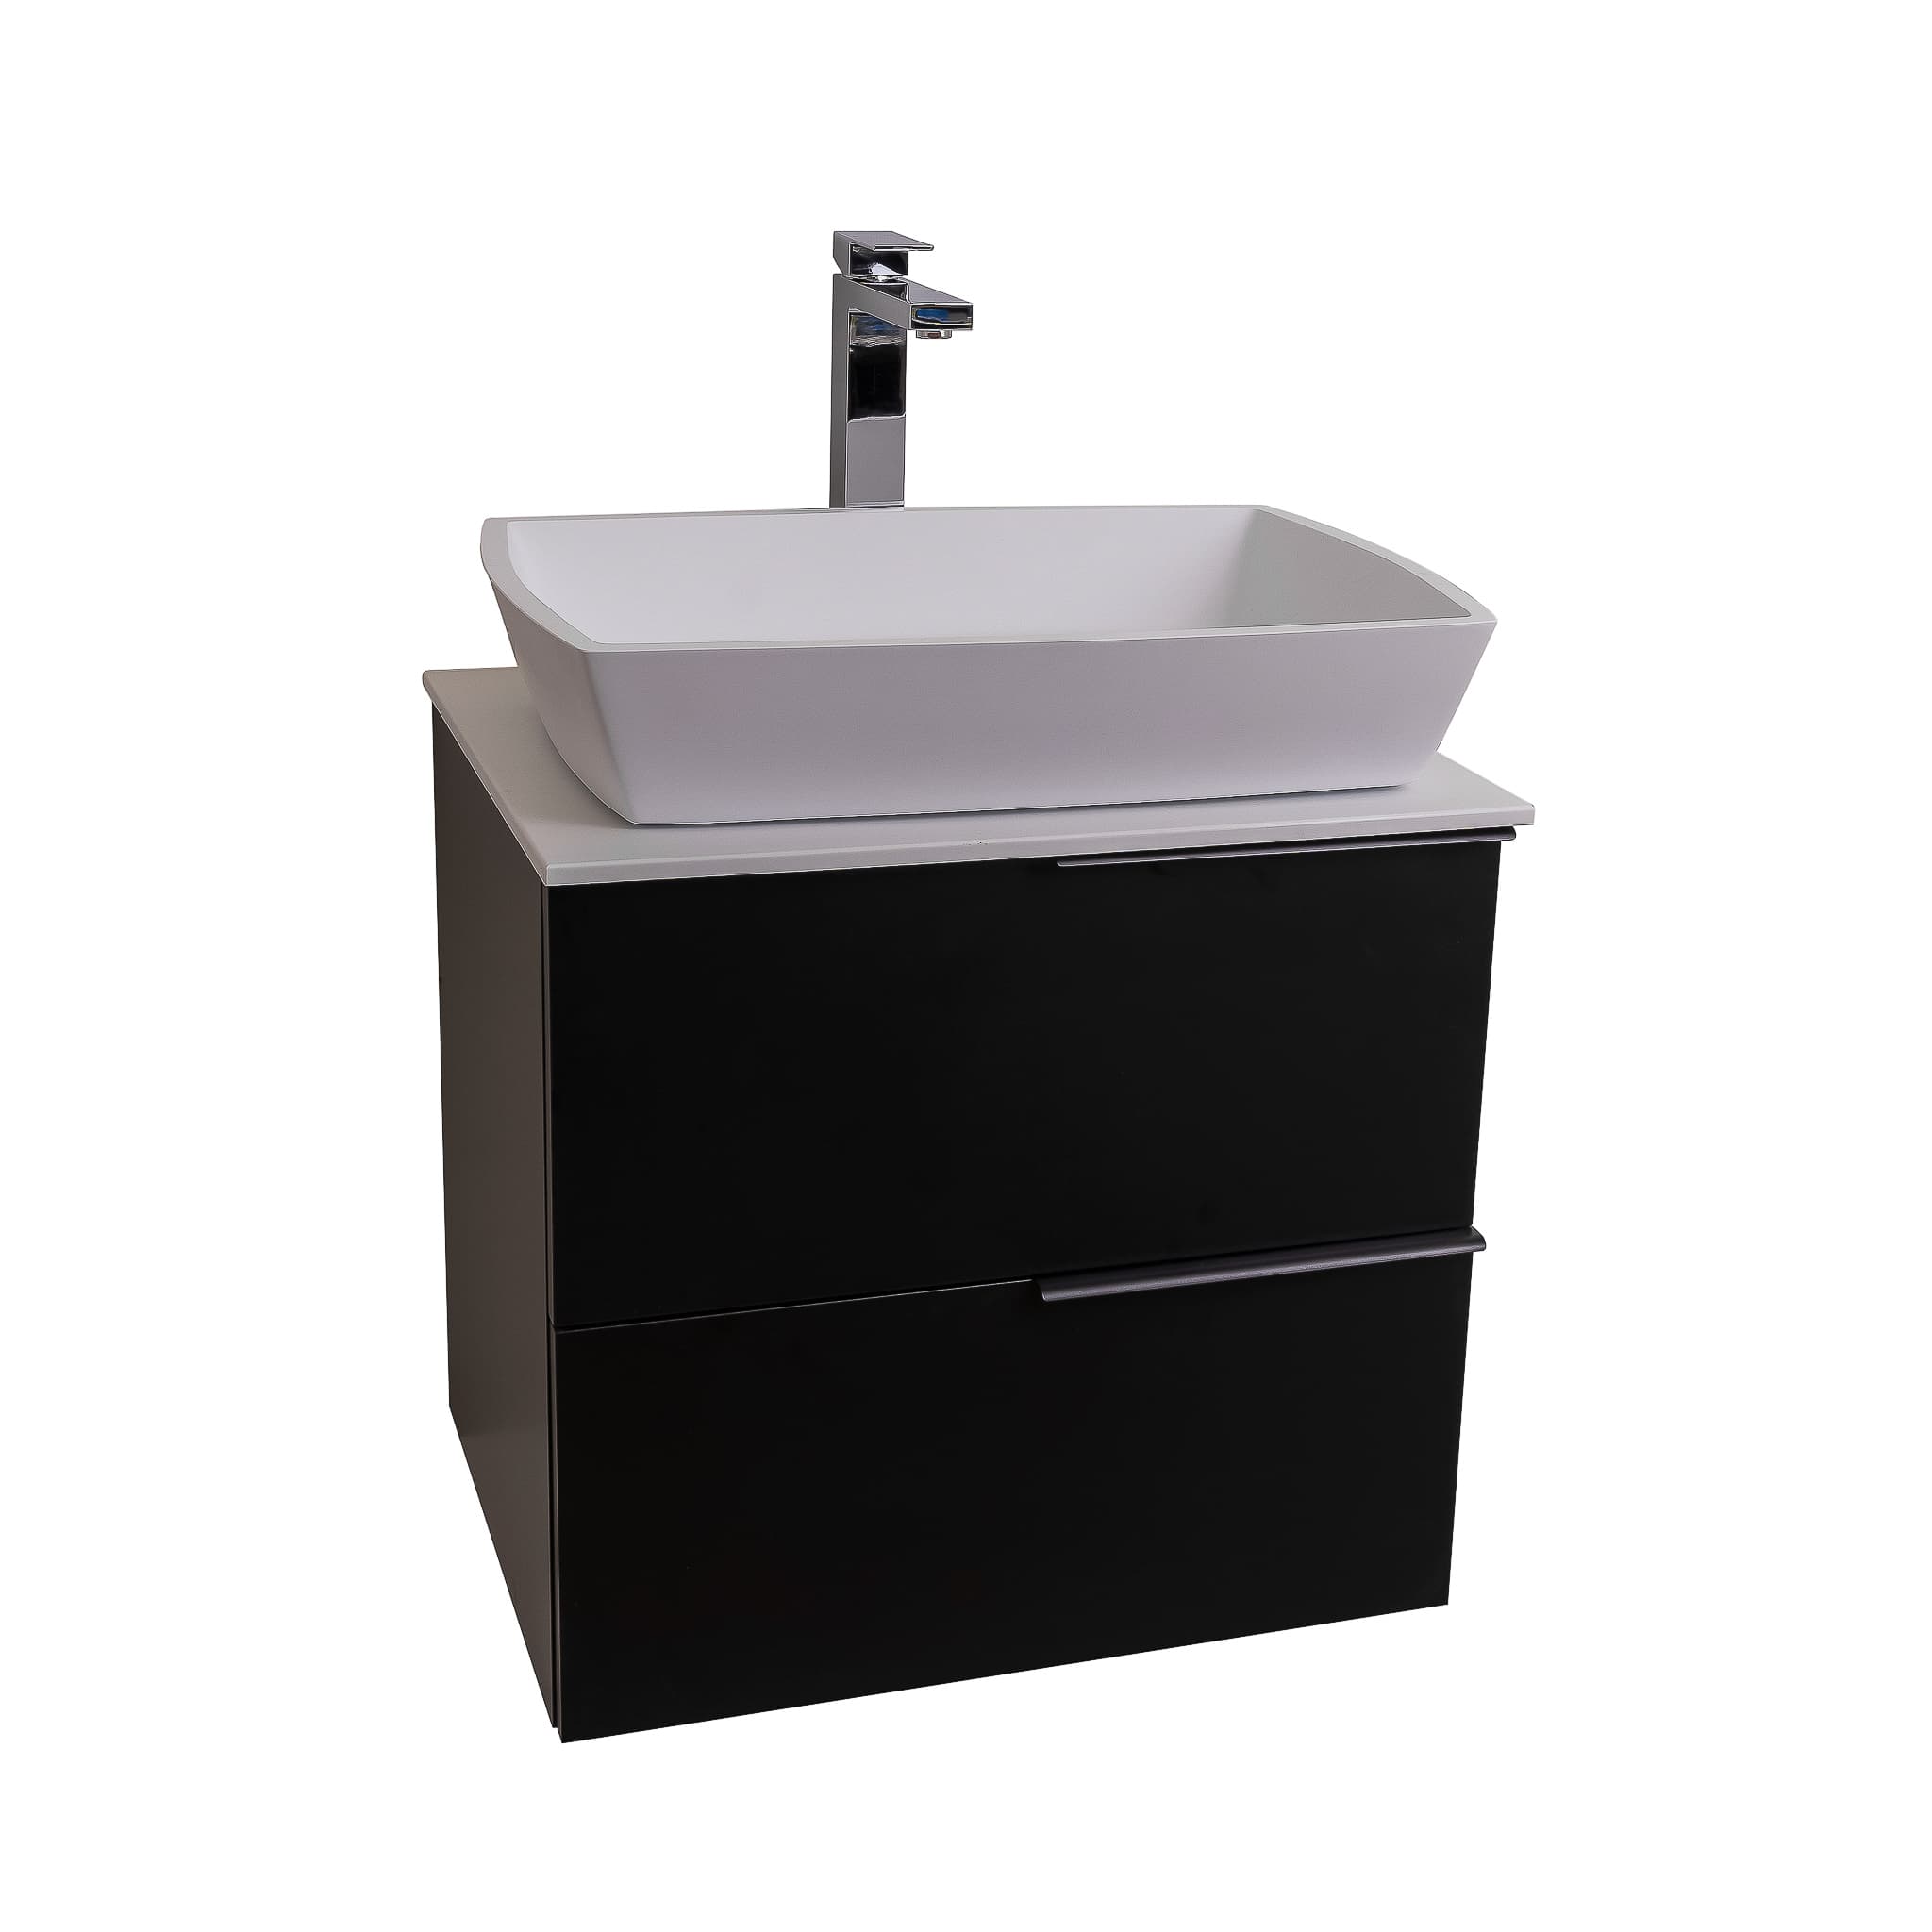 Mallorca 23.5 Matte Black Cabinet, Solid Surface Flat White Counter And Square Solid Surface White Basin 1316, Wall Mounted Modern Vanity Set